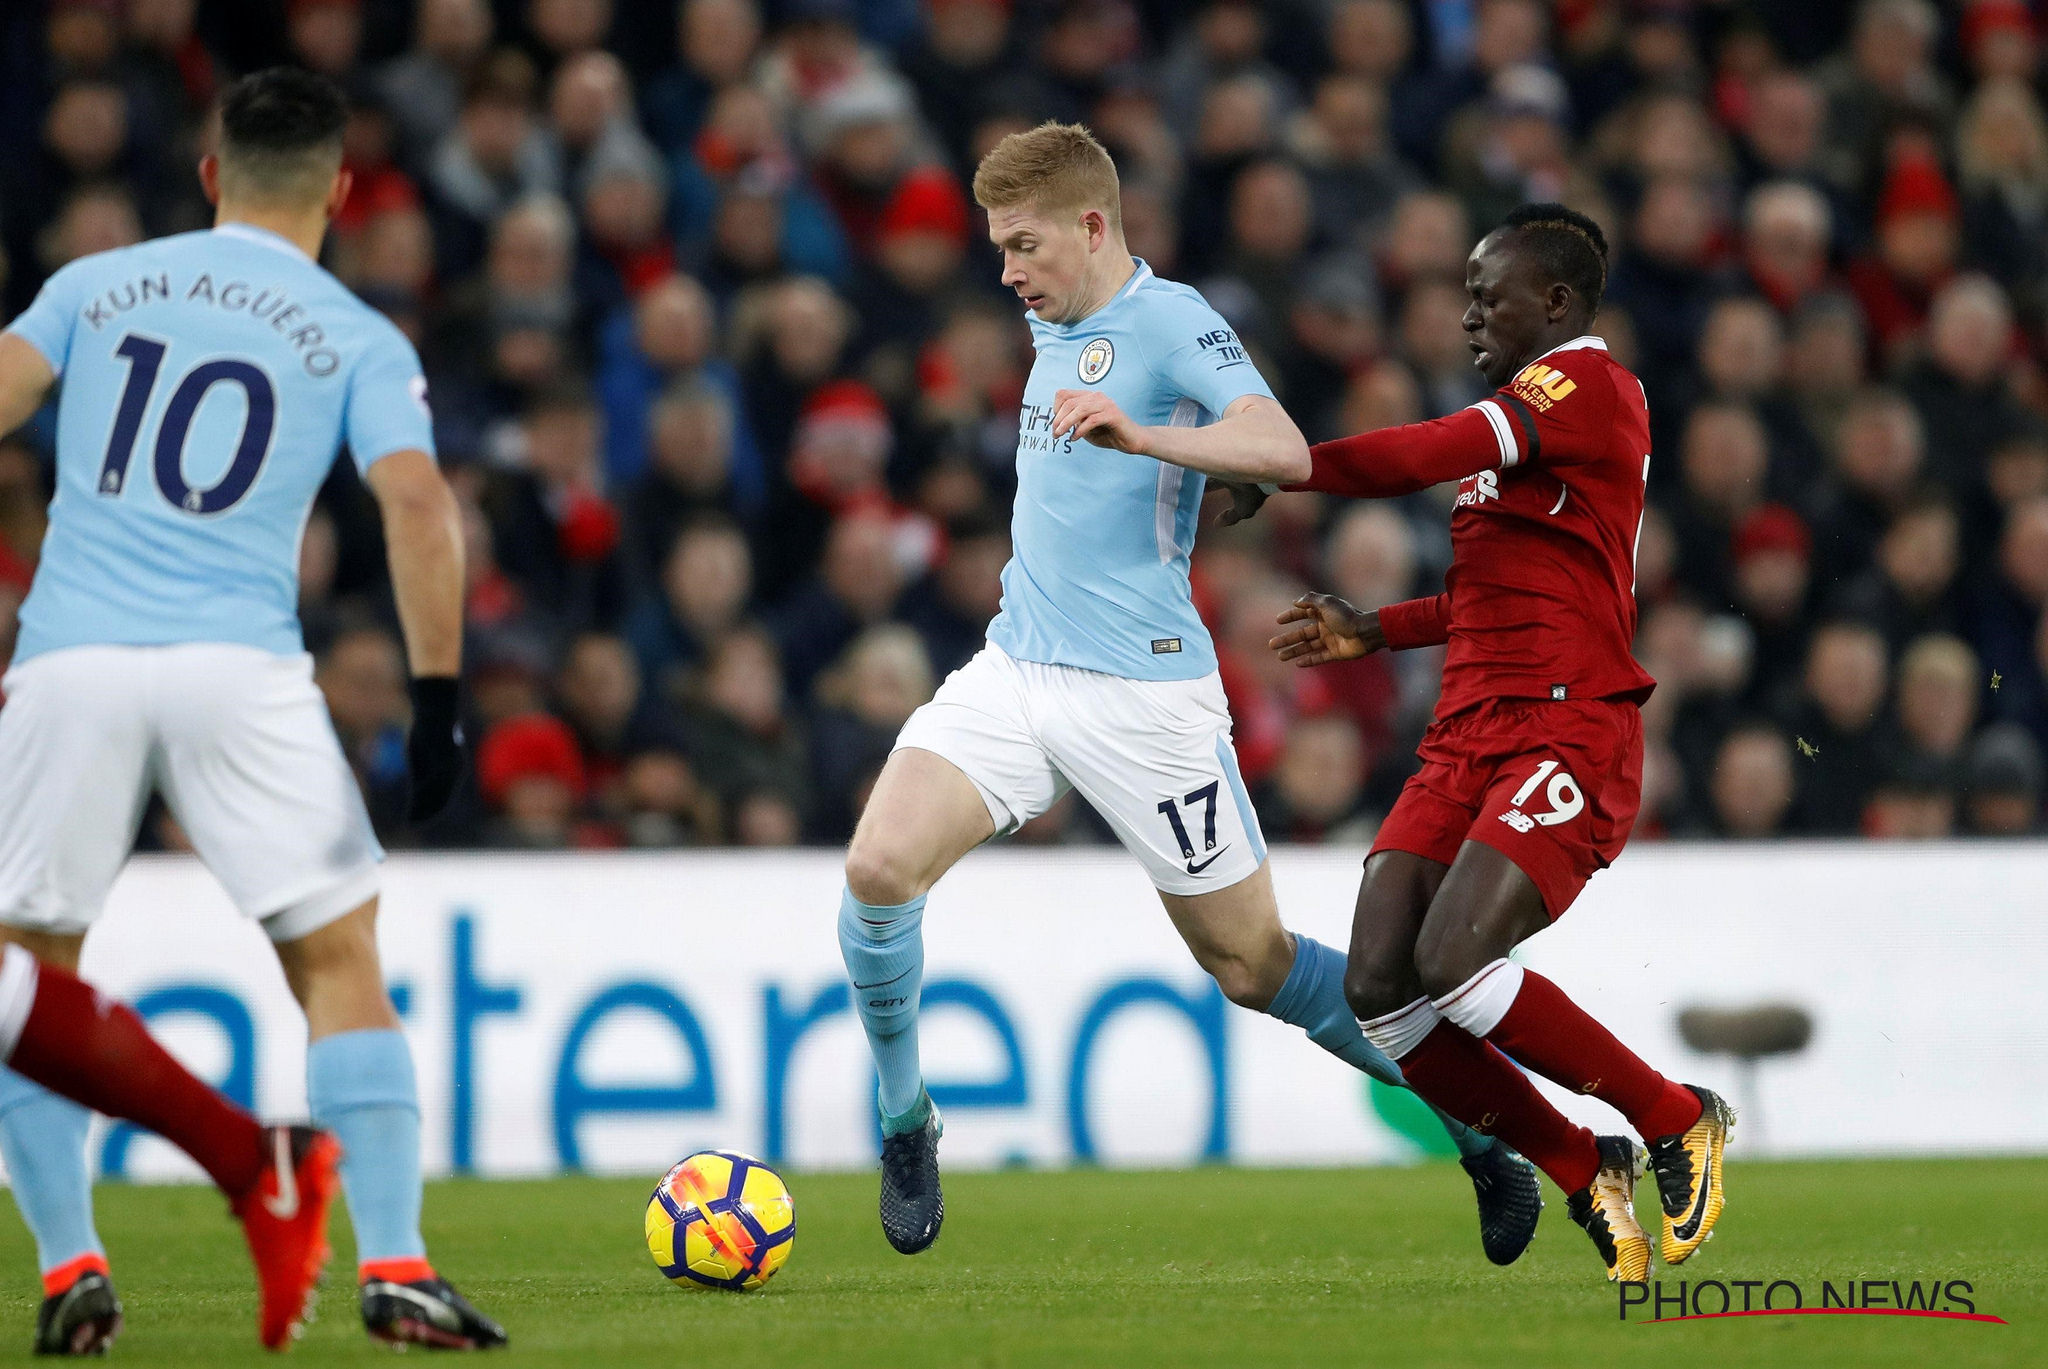 Liverpool vs Manchester City Preview